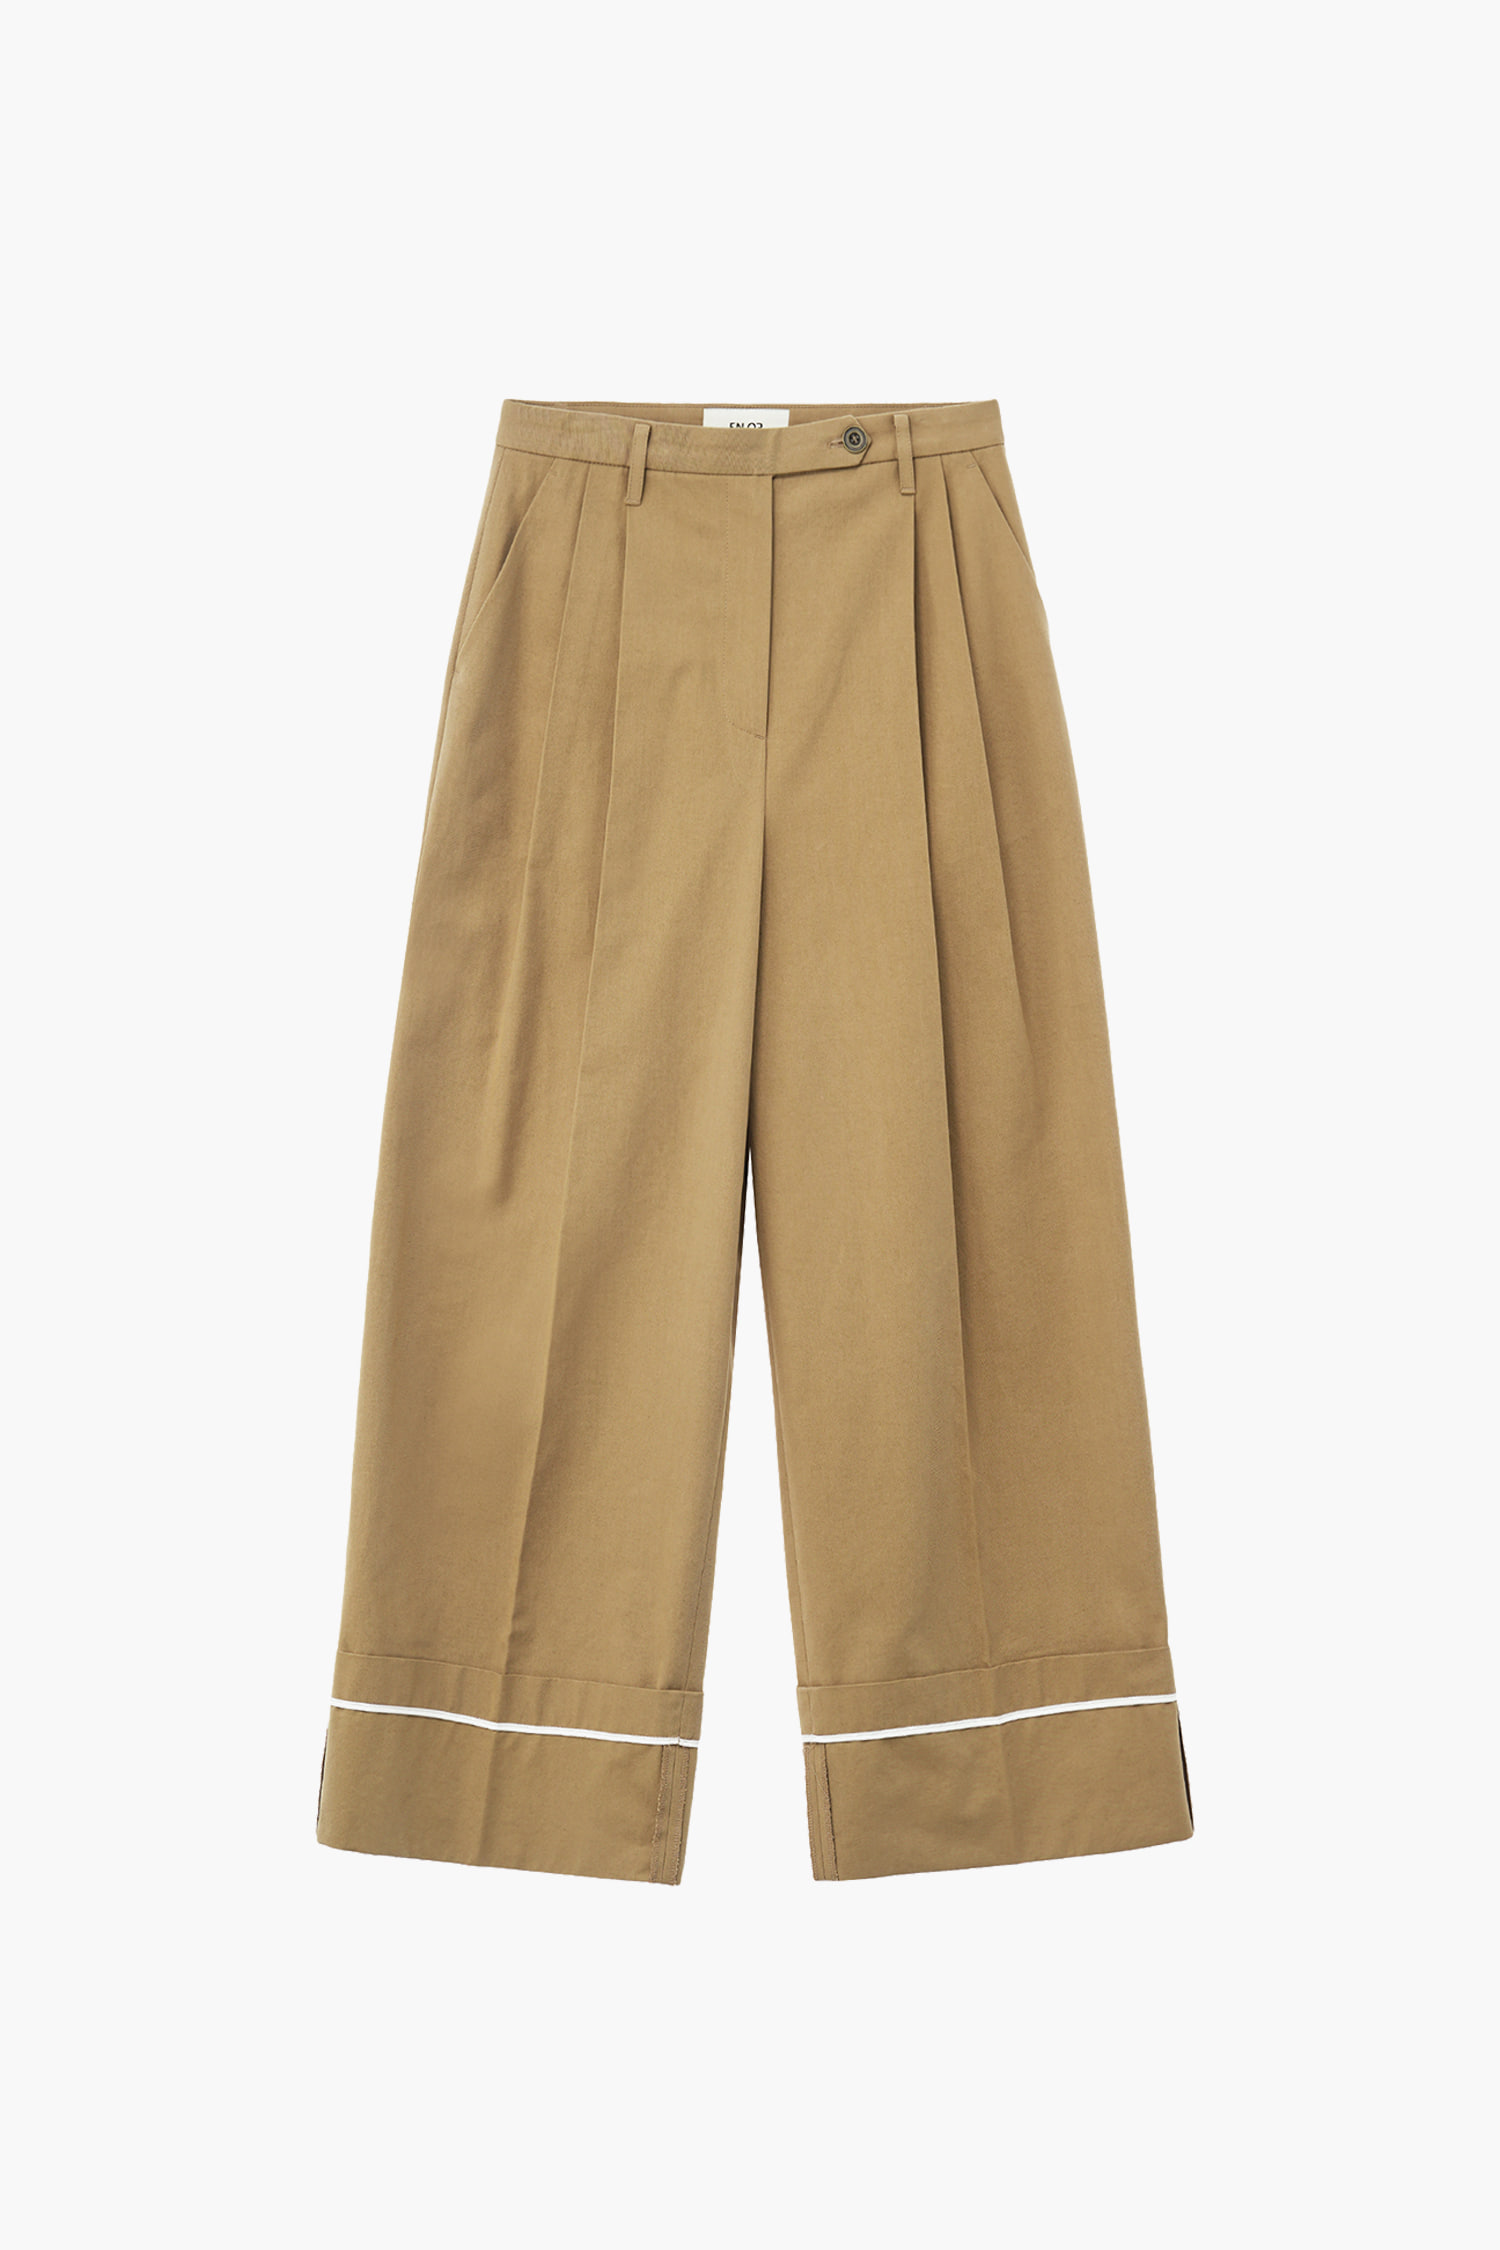 [3rd size M 3/27 pre-order] ROLL-UP WIDE PANTS - BEIGE